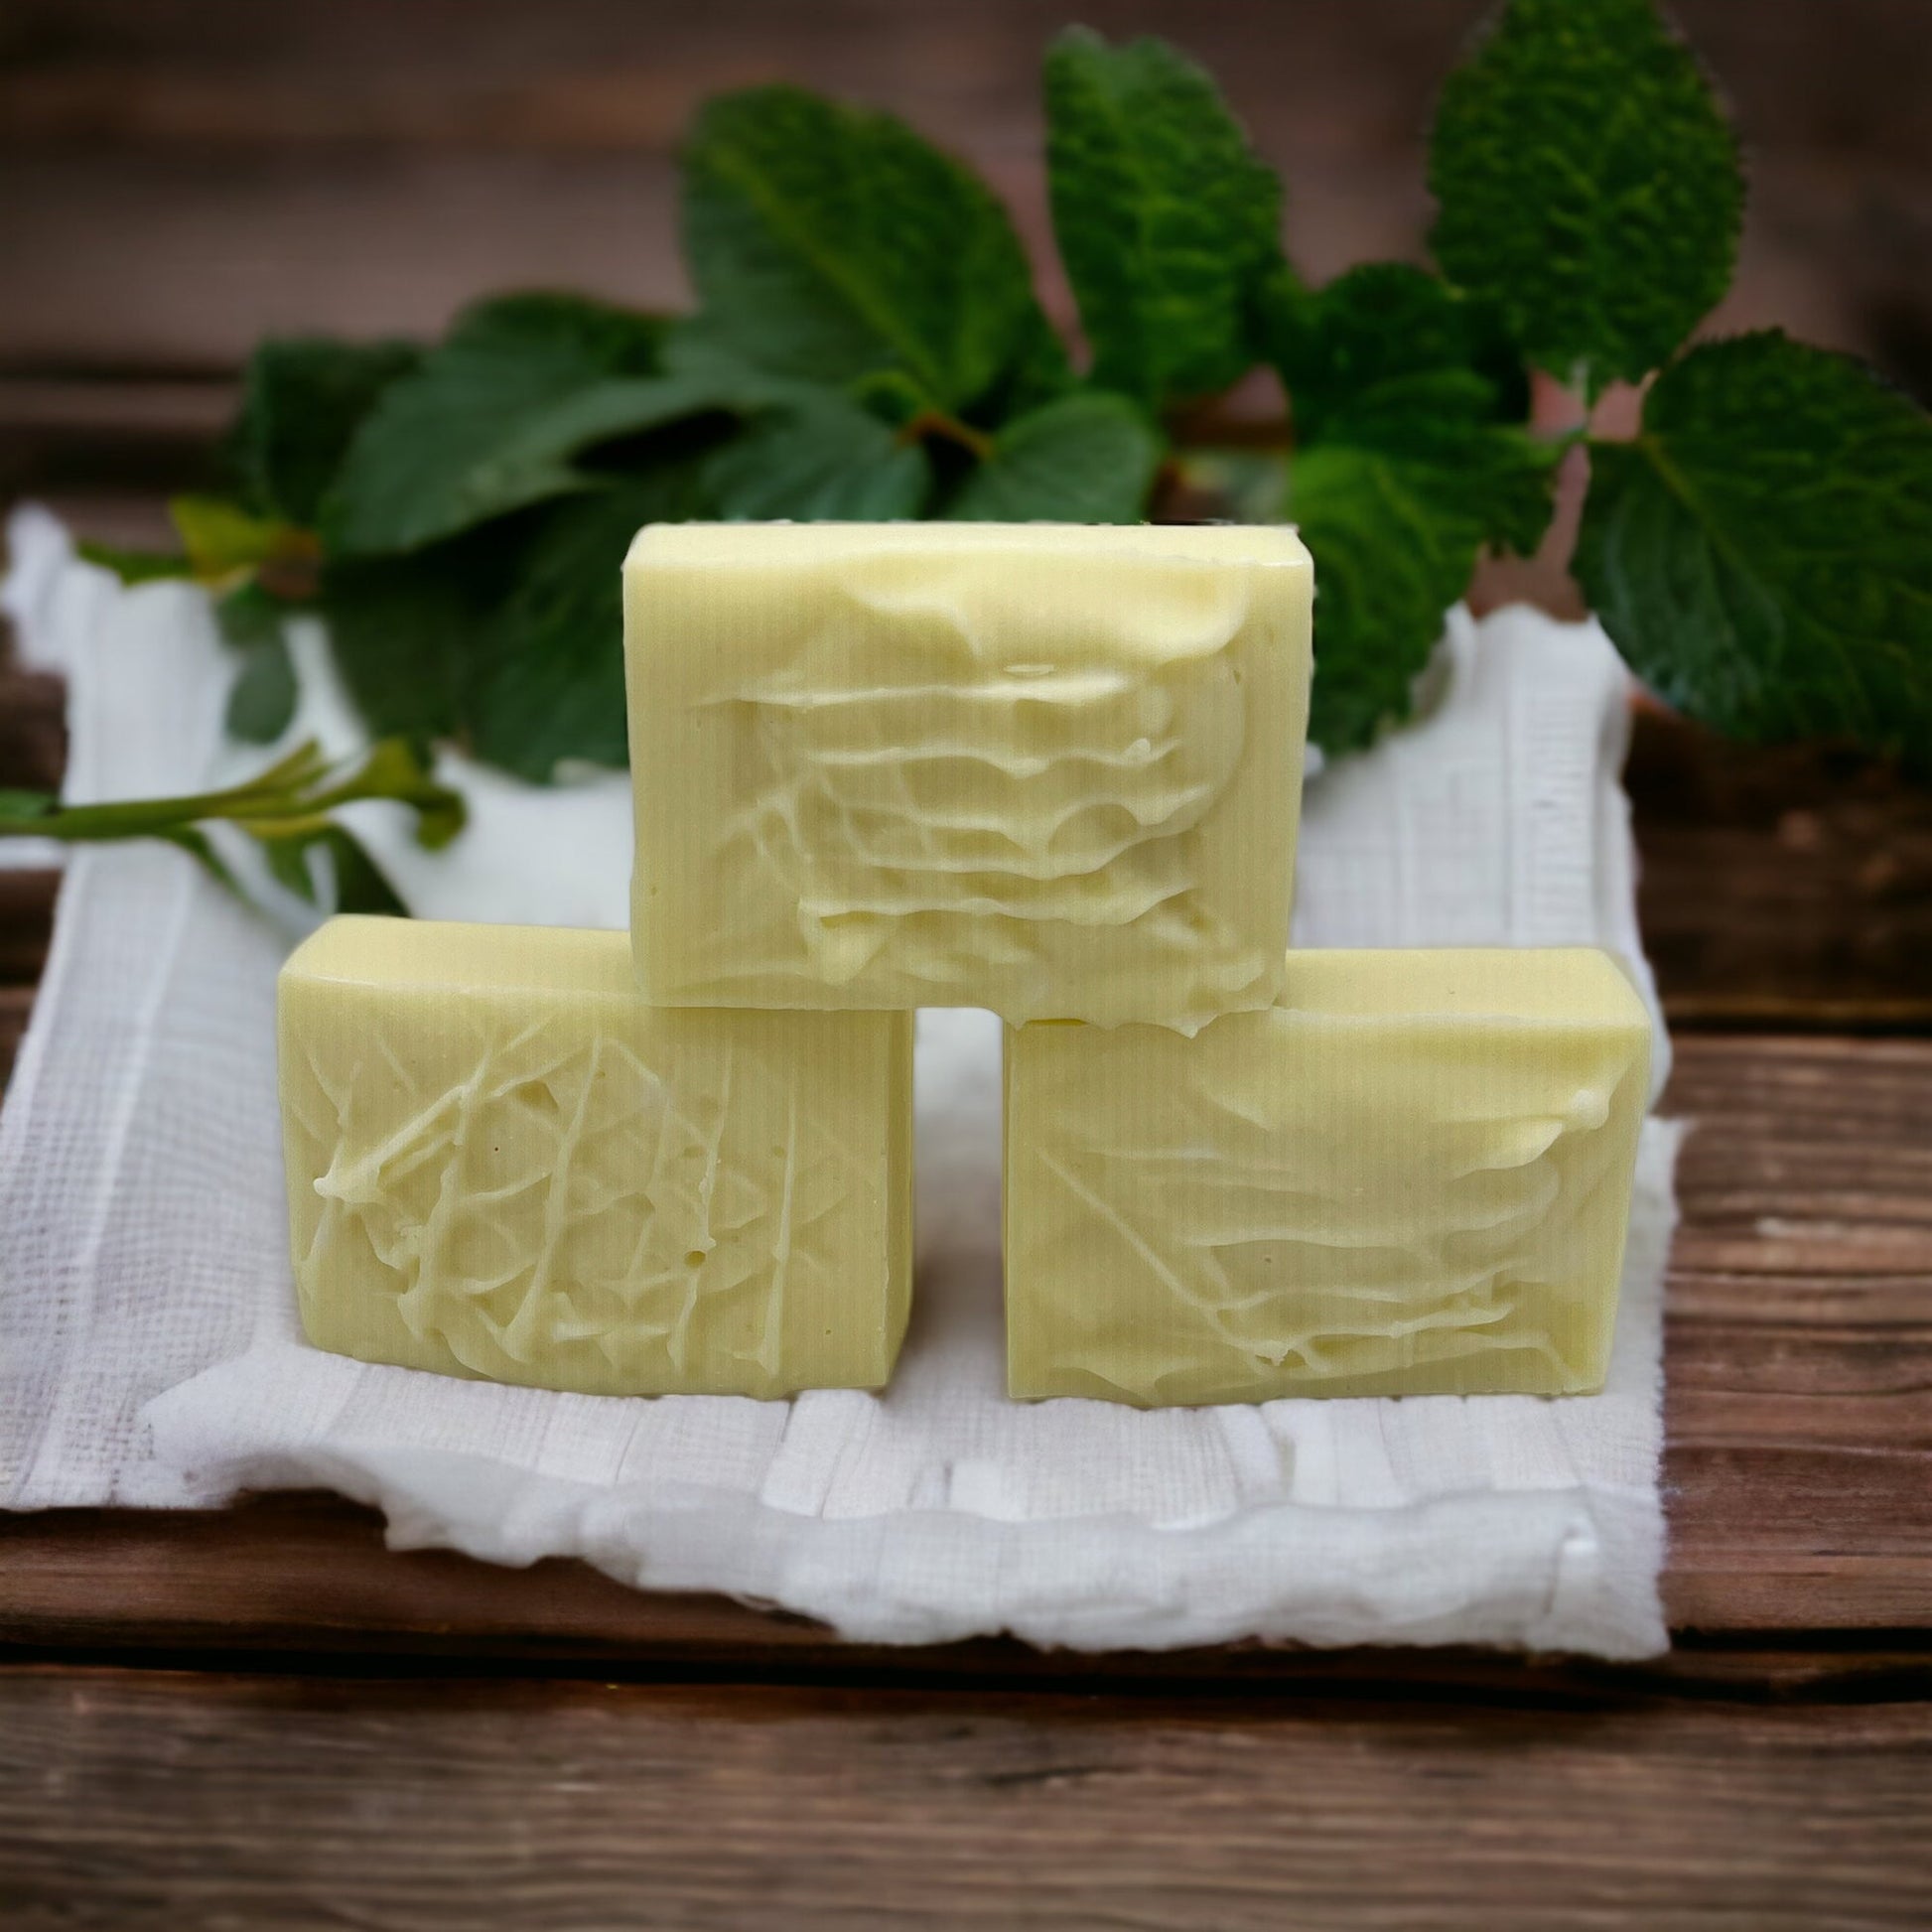 Handcrafted Tallow Soap with All-Natural Ingredients | Multiple Scents - Dr. Dave's Primal Essence